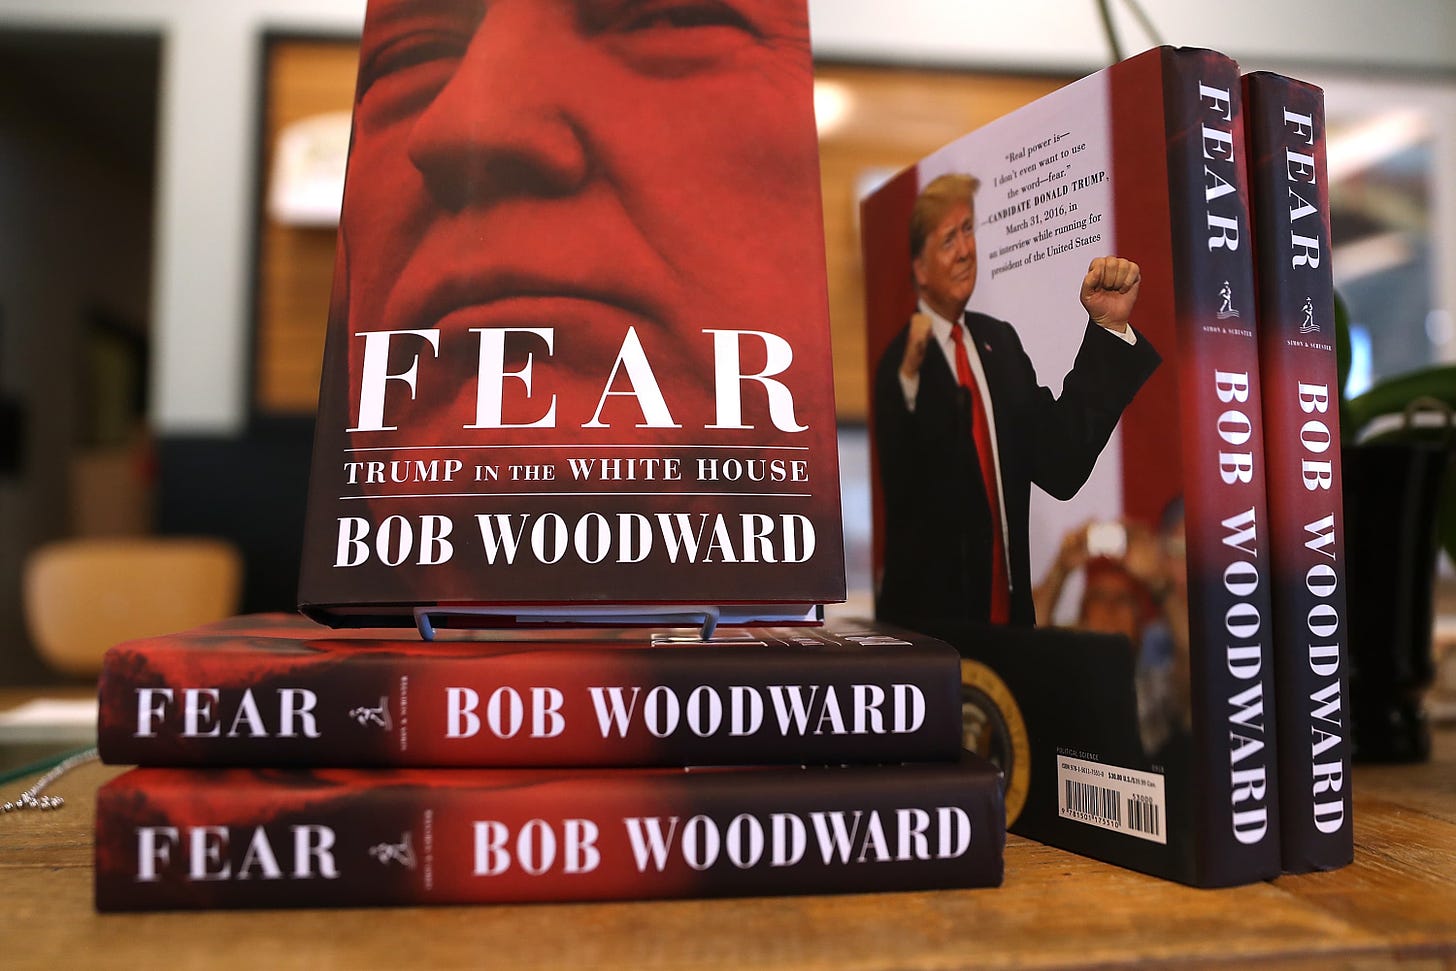 Bob Woodward's 'Fear' hits record sales at Simon & Schuster in 1st week